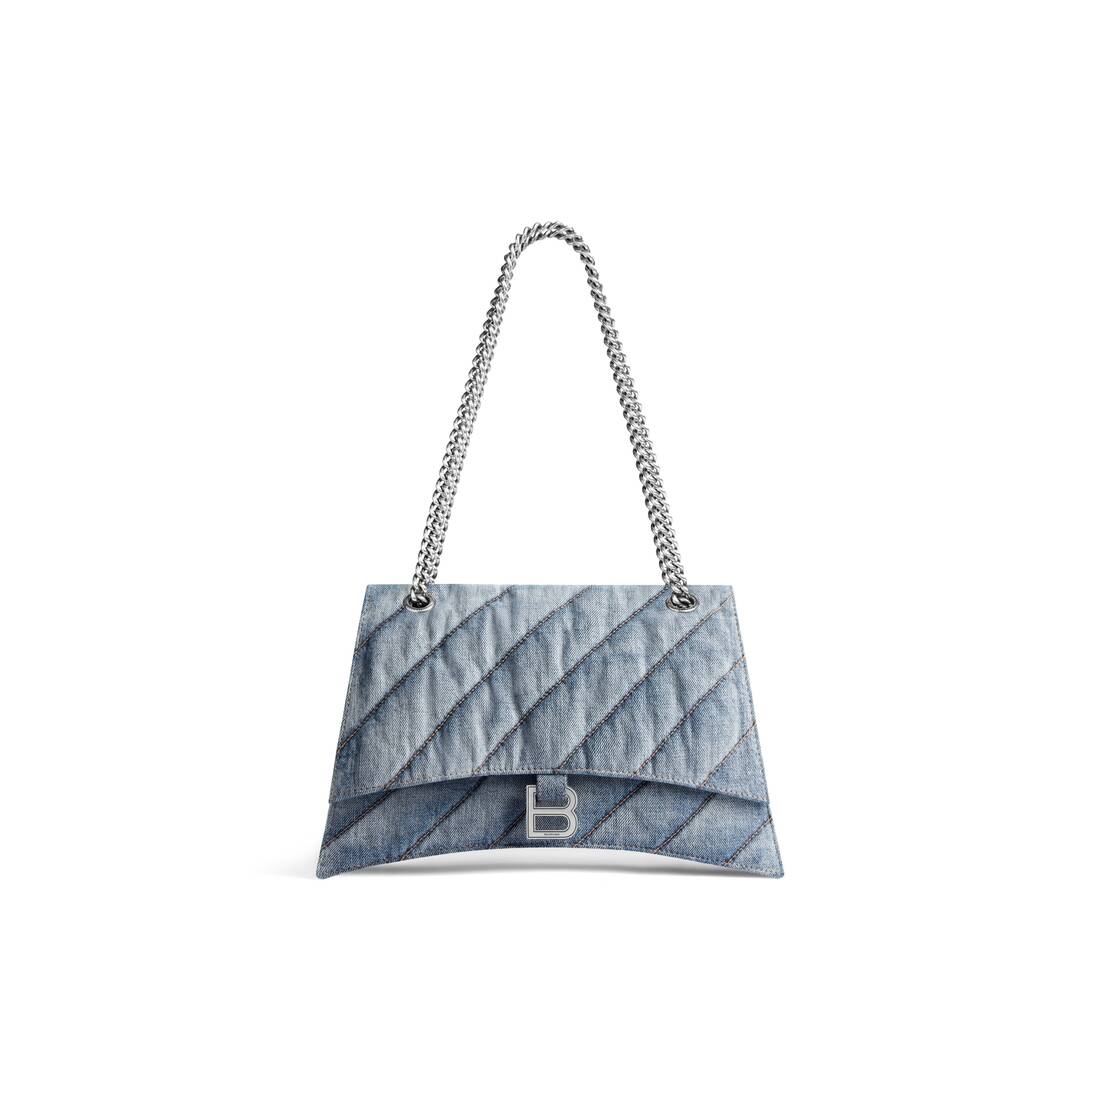 Chanel Bag Round Earth Small logo White | 3D model